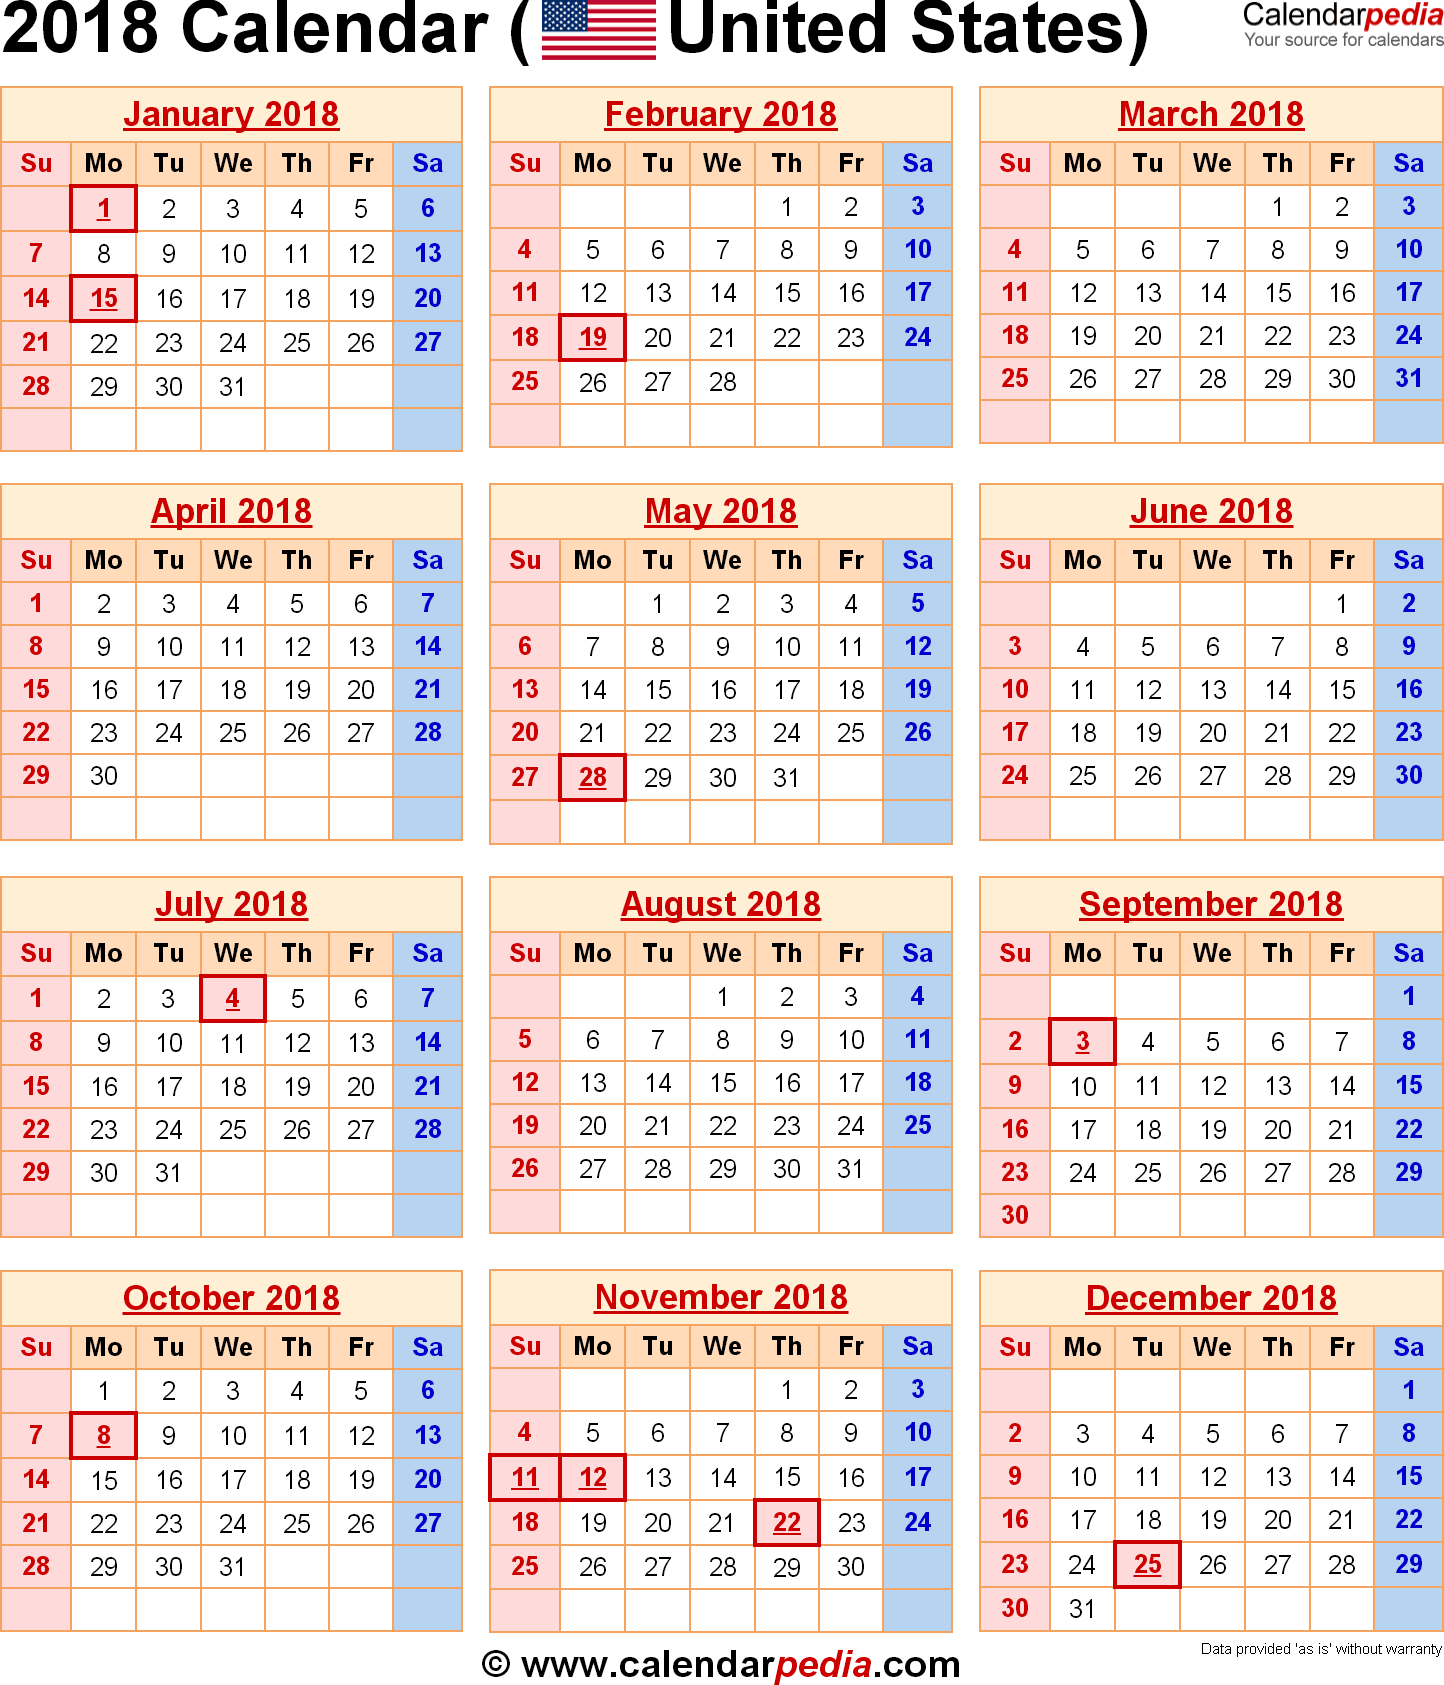 2018 Calendar with Federal Holidays & Excel/PDF/Word templates